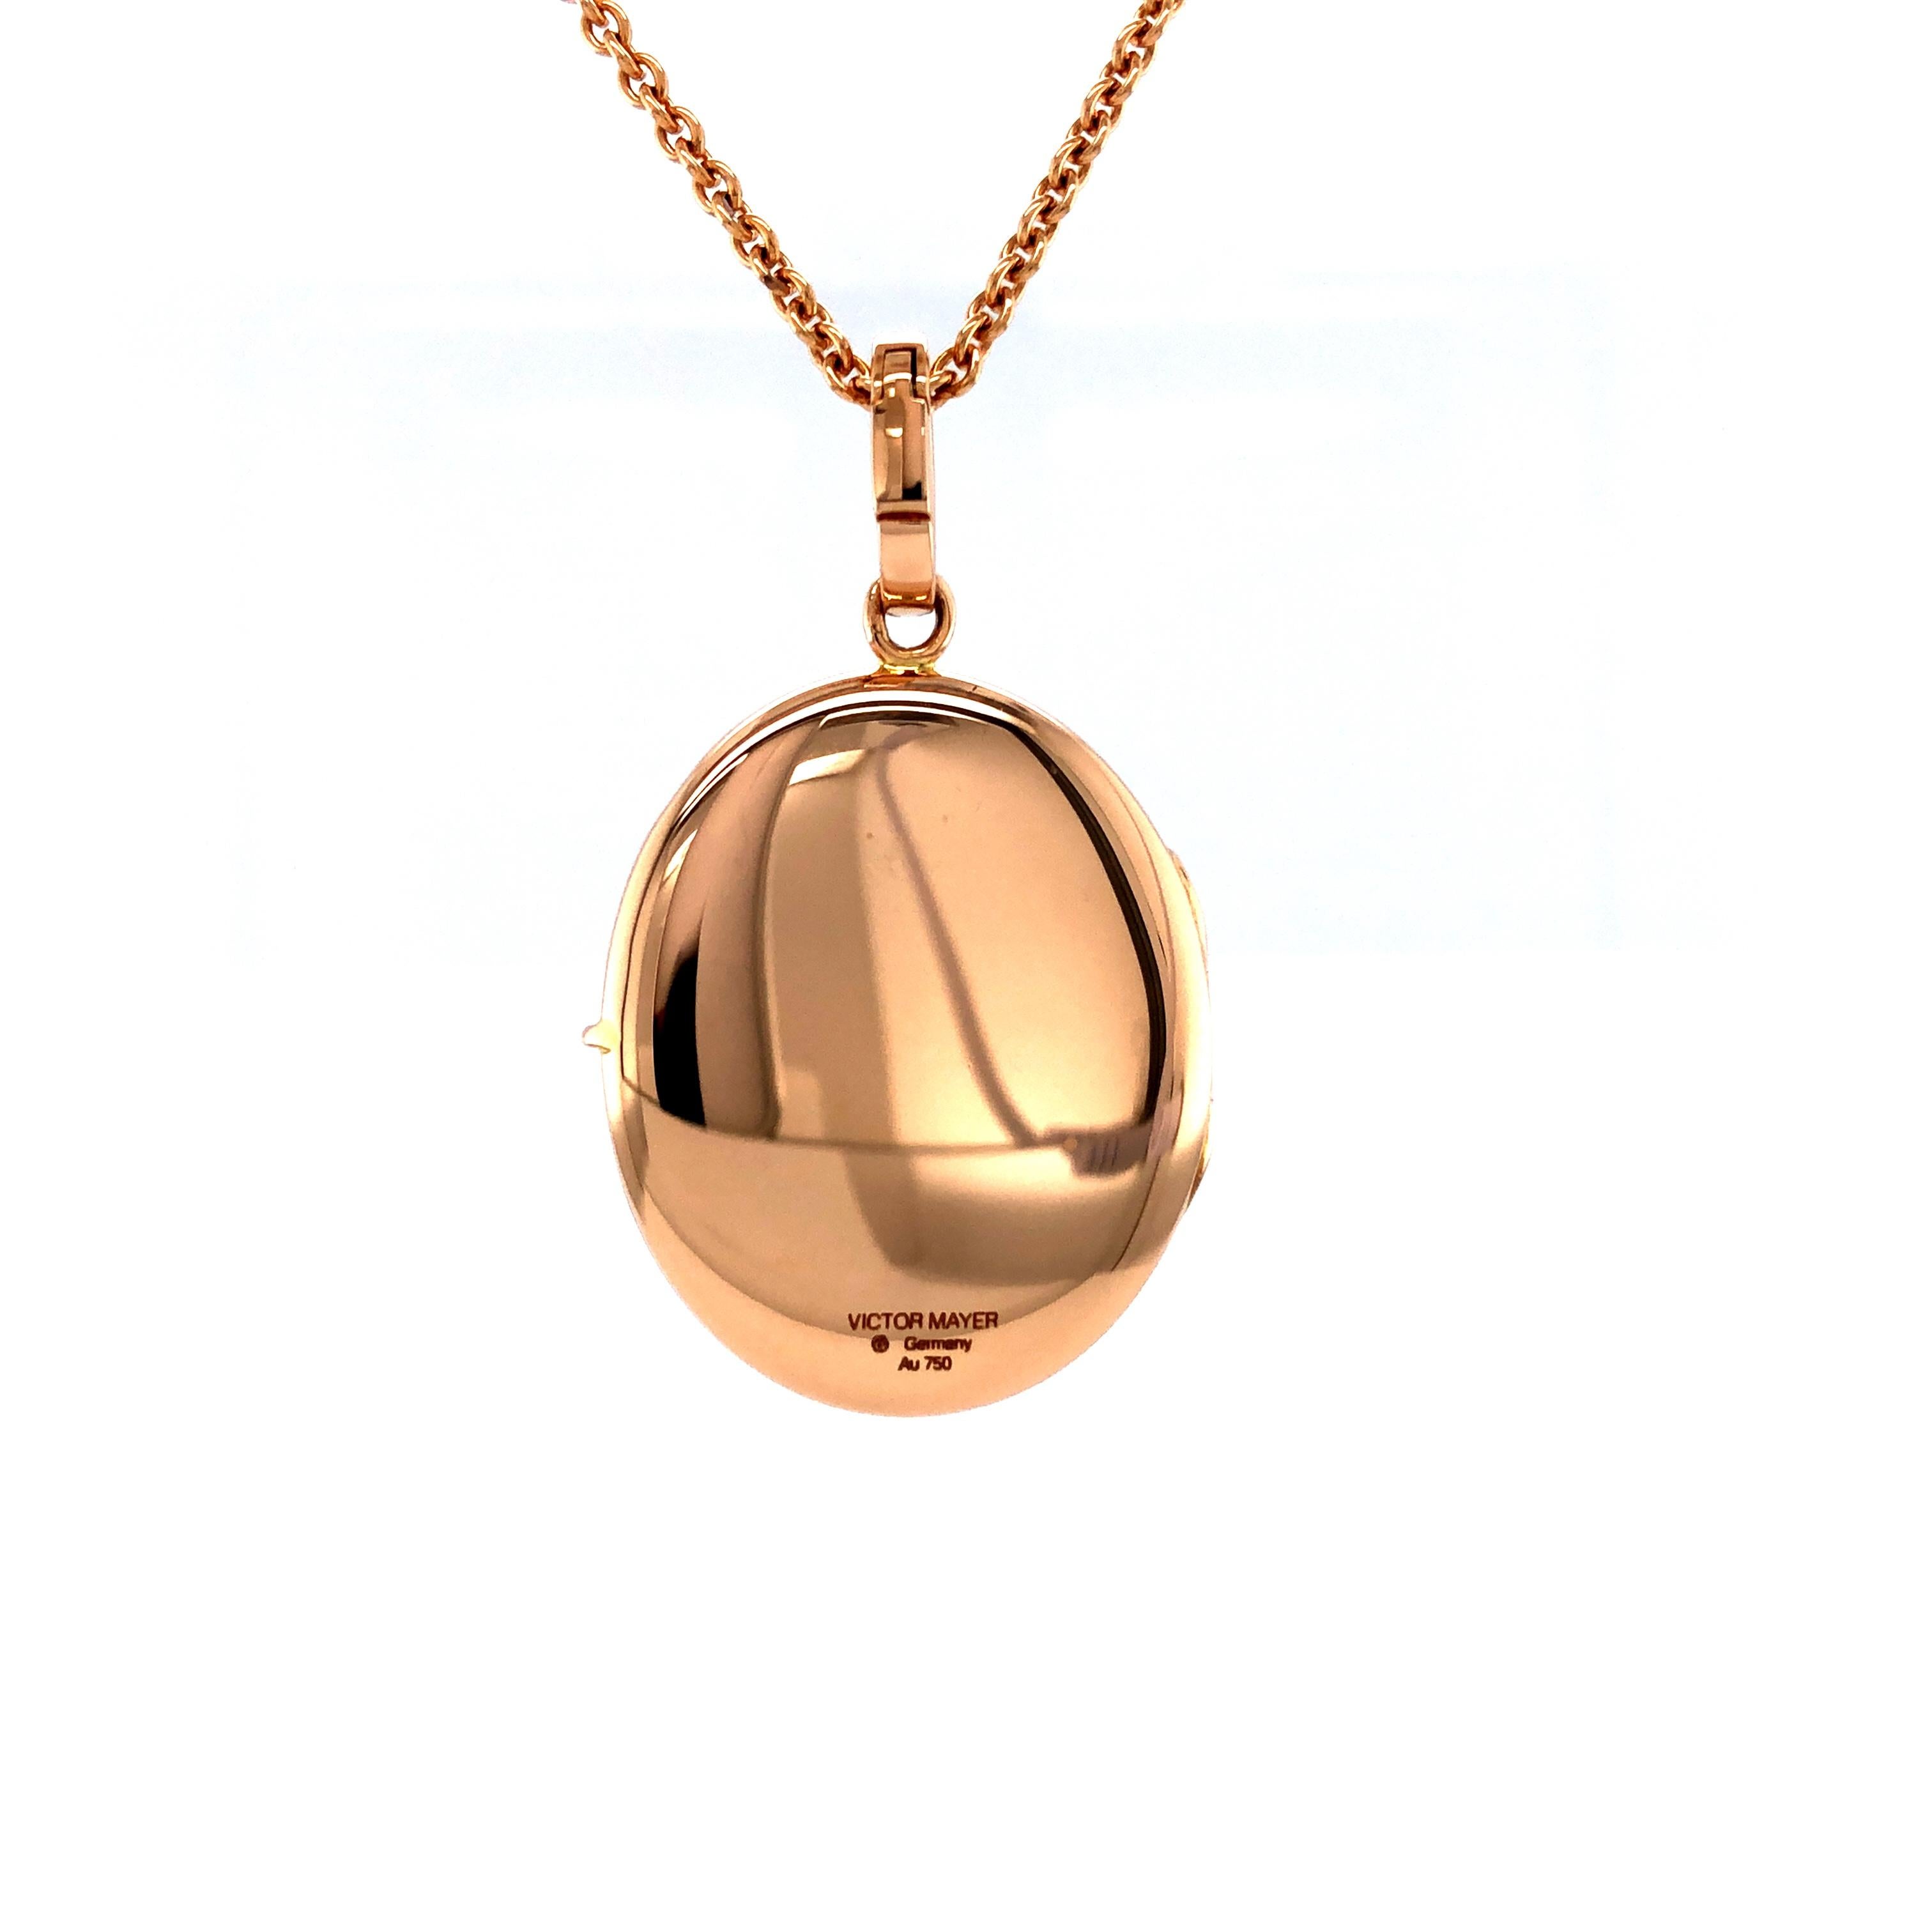 Oval Locket Pendant - 18k Rose Gold - 28mm x 23mm In New Condition For Sale In Pforzheim, DE